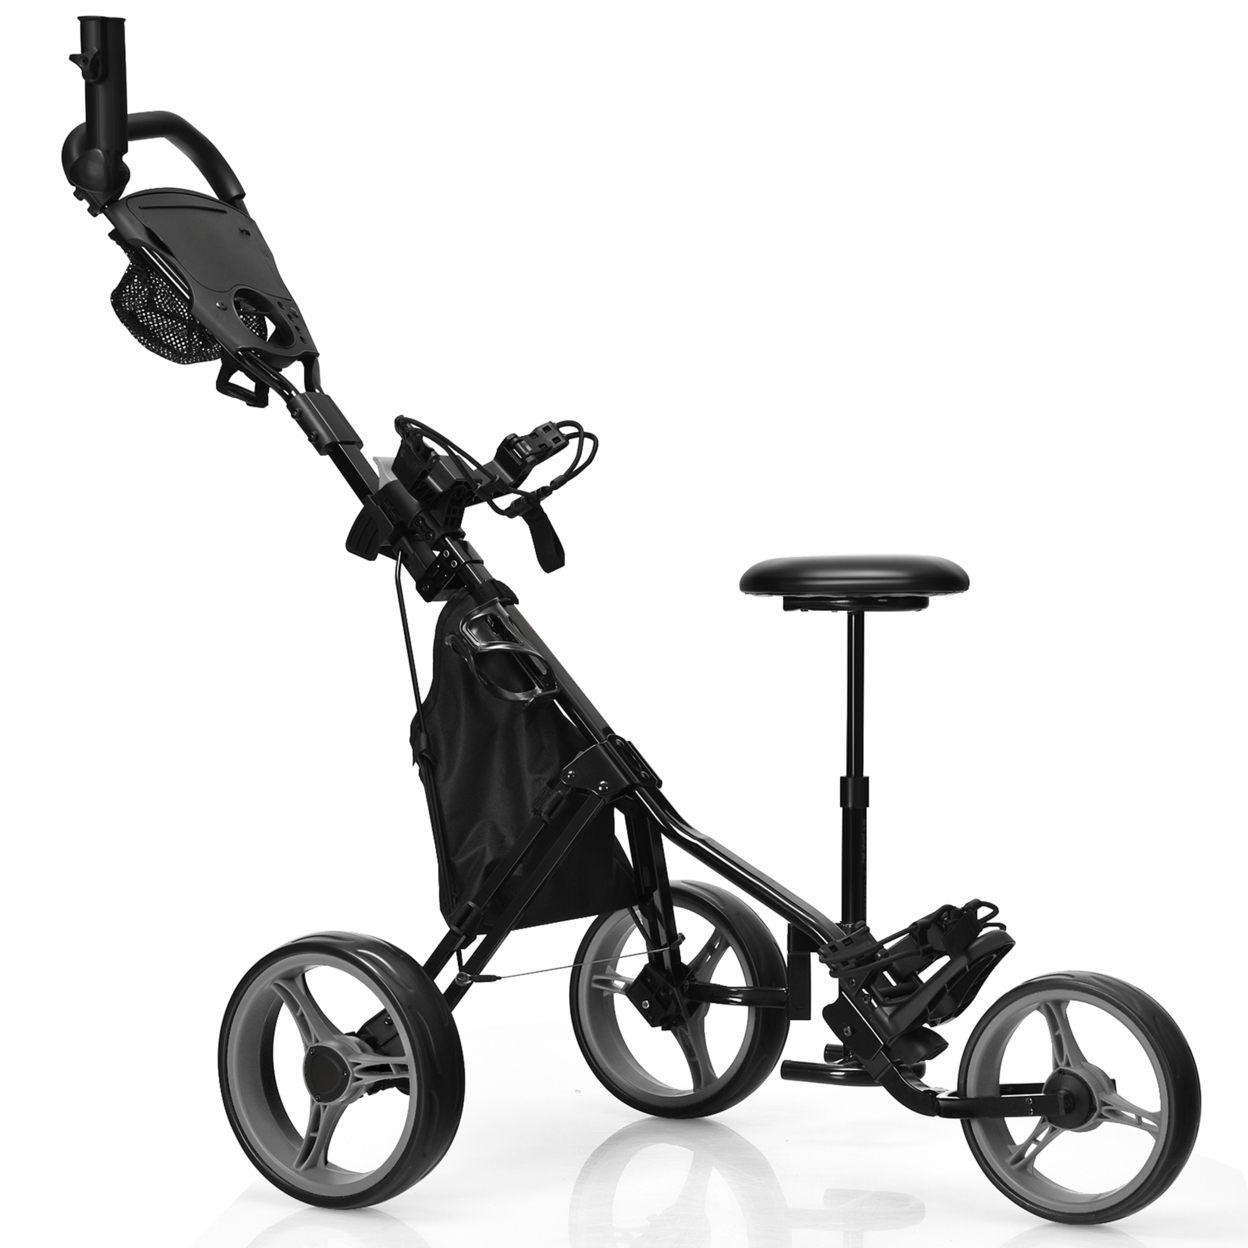 3-Wheel Foldable Golf Push Pull Cart Trolley W/ Seat Adjustable Handle - Red